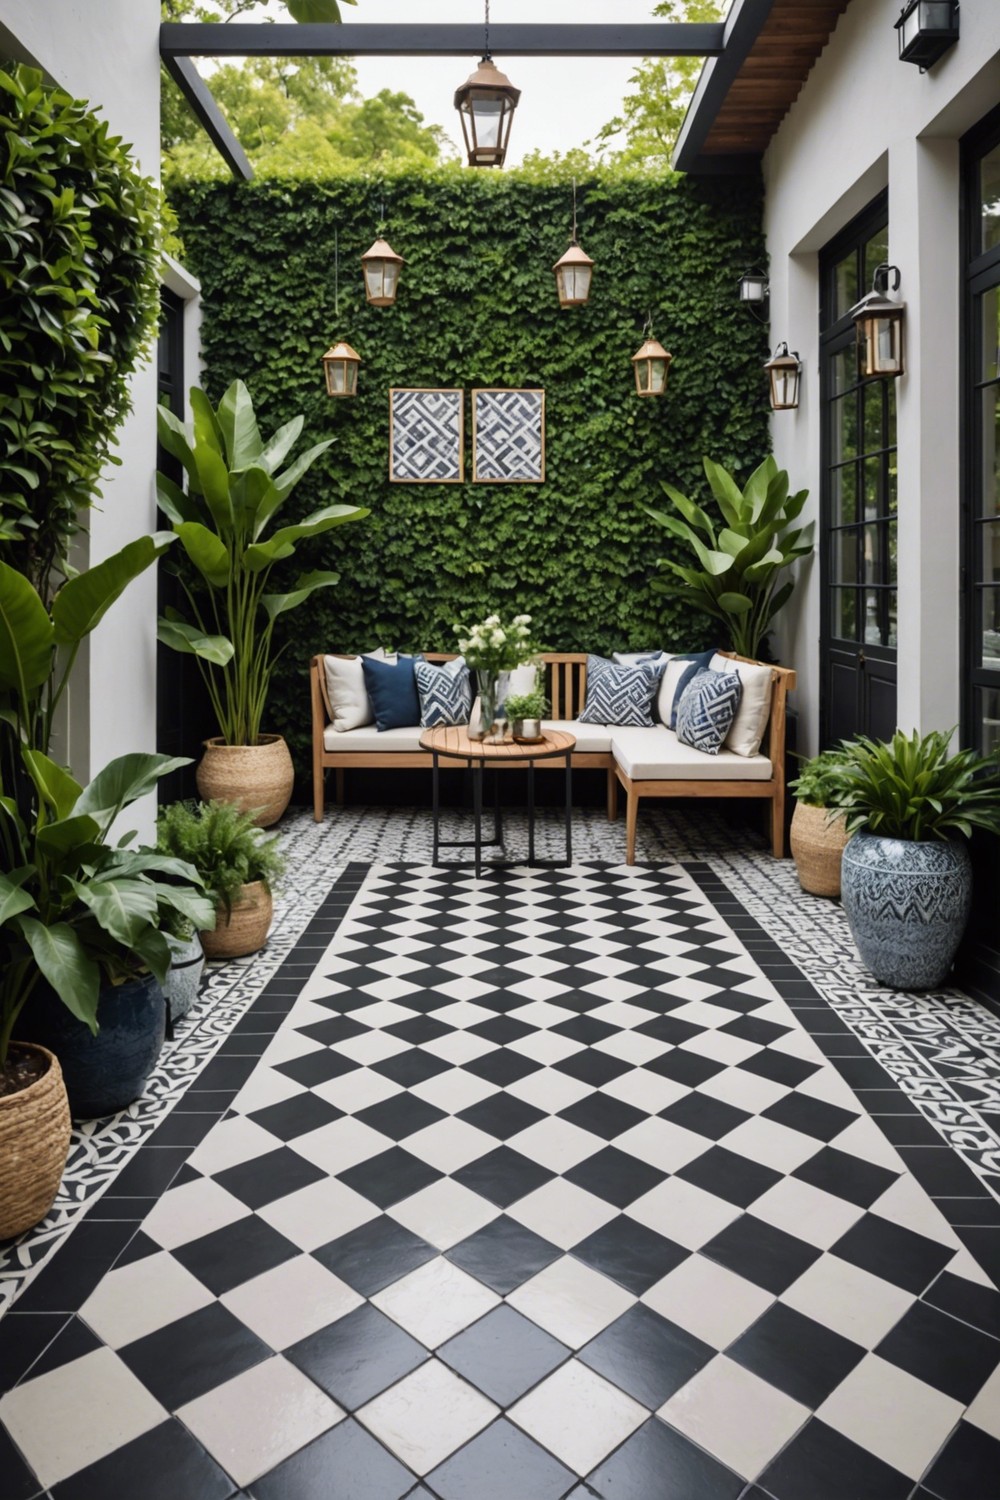 Patterned Tiles for a Geometric Patio